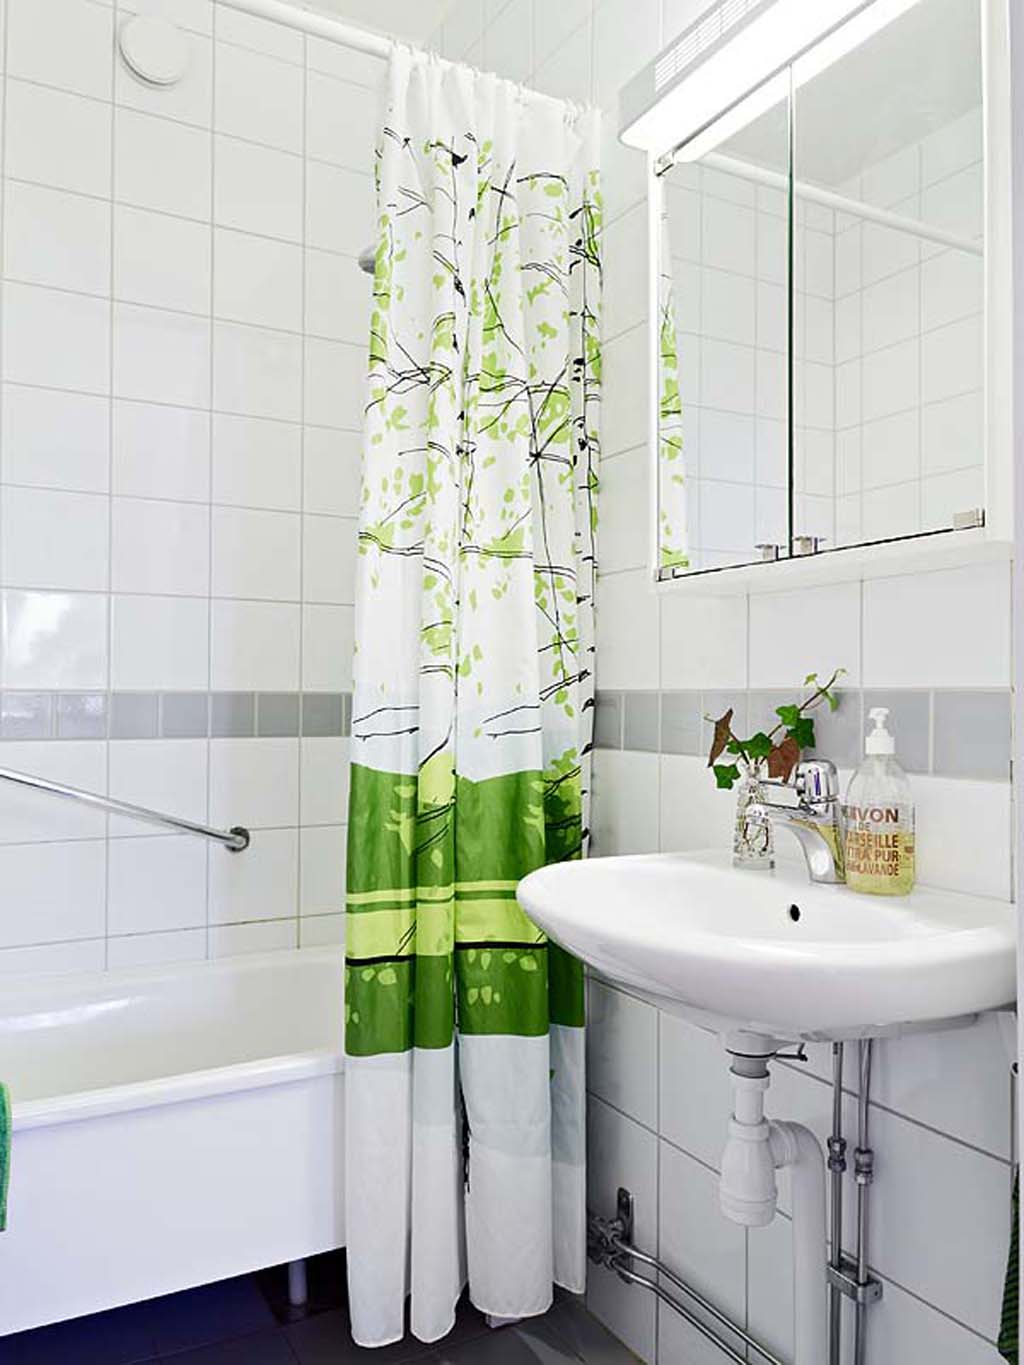 Shower Curtain Gorgeous Stylish Shower Curtain Design Feat Gorgeous Apartment Bathroom With Wall Hung Sink Idea And Small Frame Less Vanity Mirror Apartment Modern Minimalist Apartment Bathroom Interior Design With Free Standing Bathtub